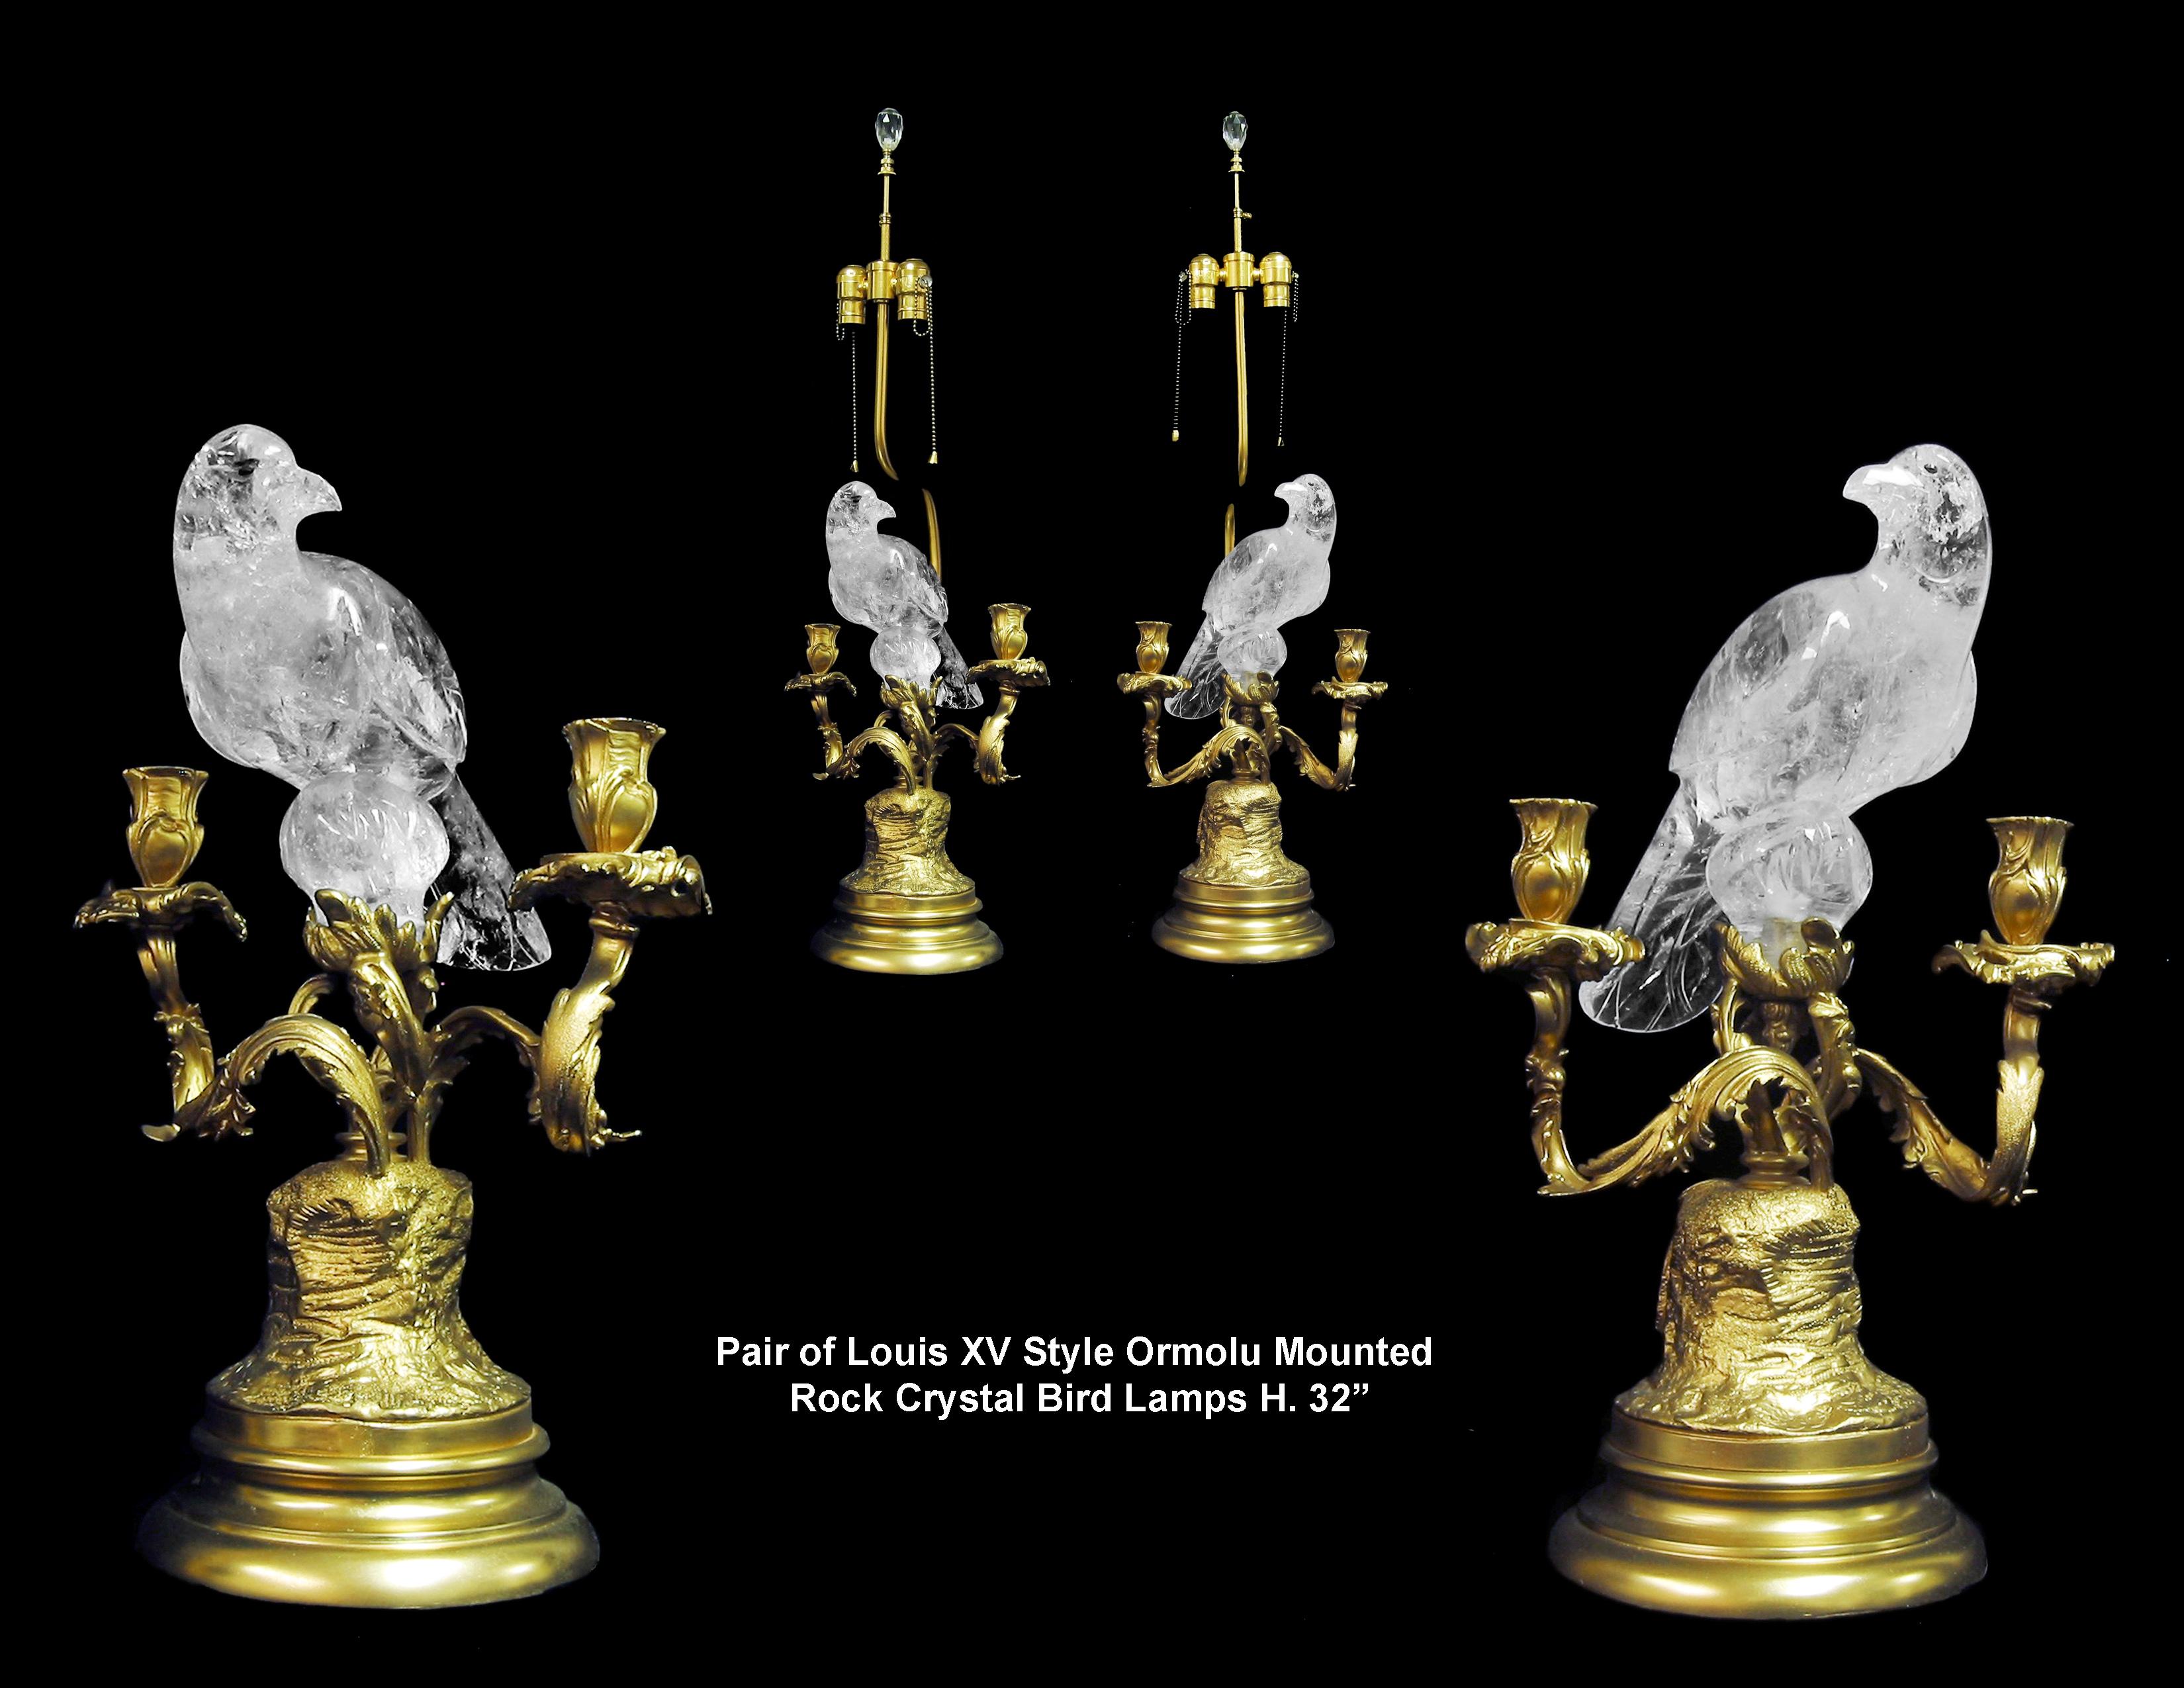 Contemporary Ormolu and Rock Crystal Bird Candelabra Lamps, French Louis XV Style For Sale